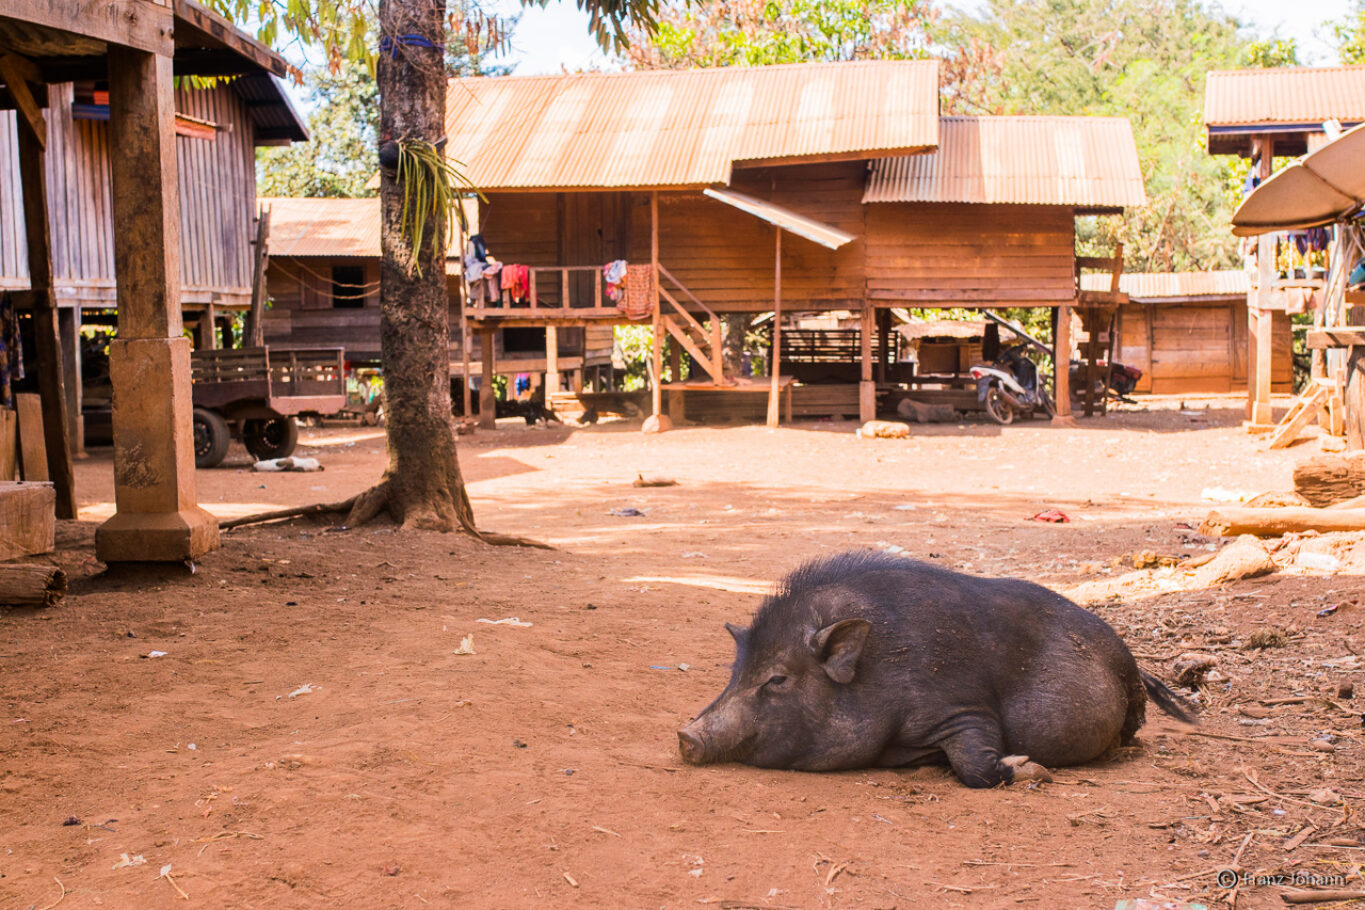 Pig during the afternoon nap; Laos